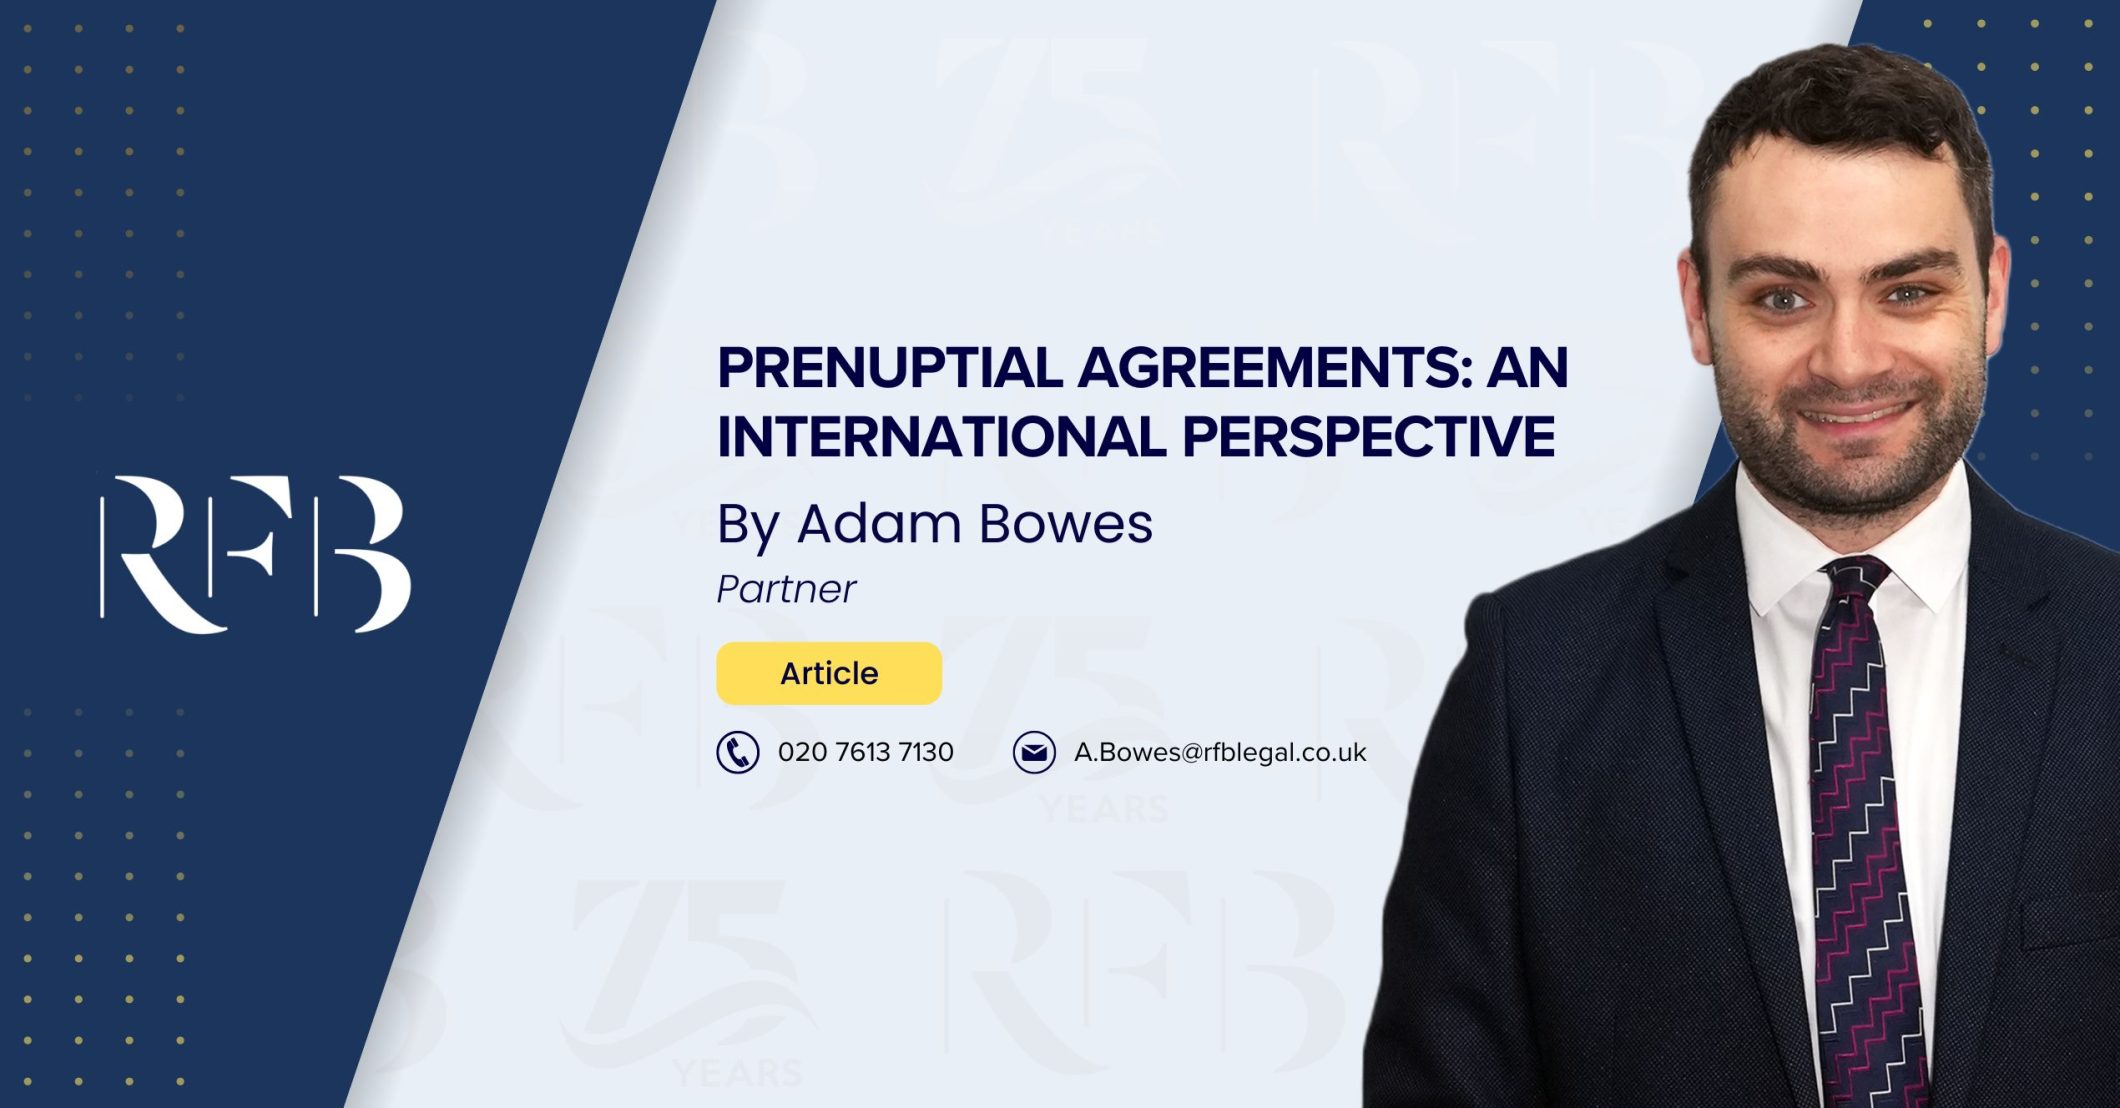 Cover image for article 'Prenuptial Agreements: An International Perspective' featuring Solicitor Adam Bowes